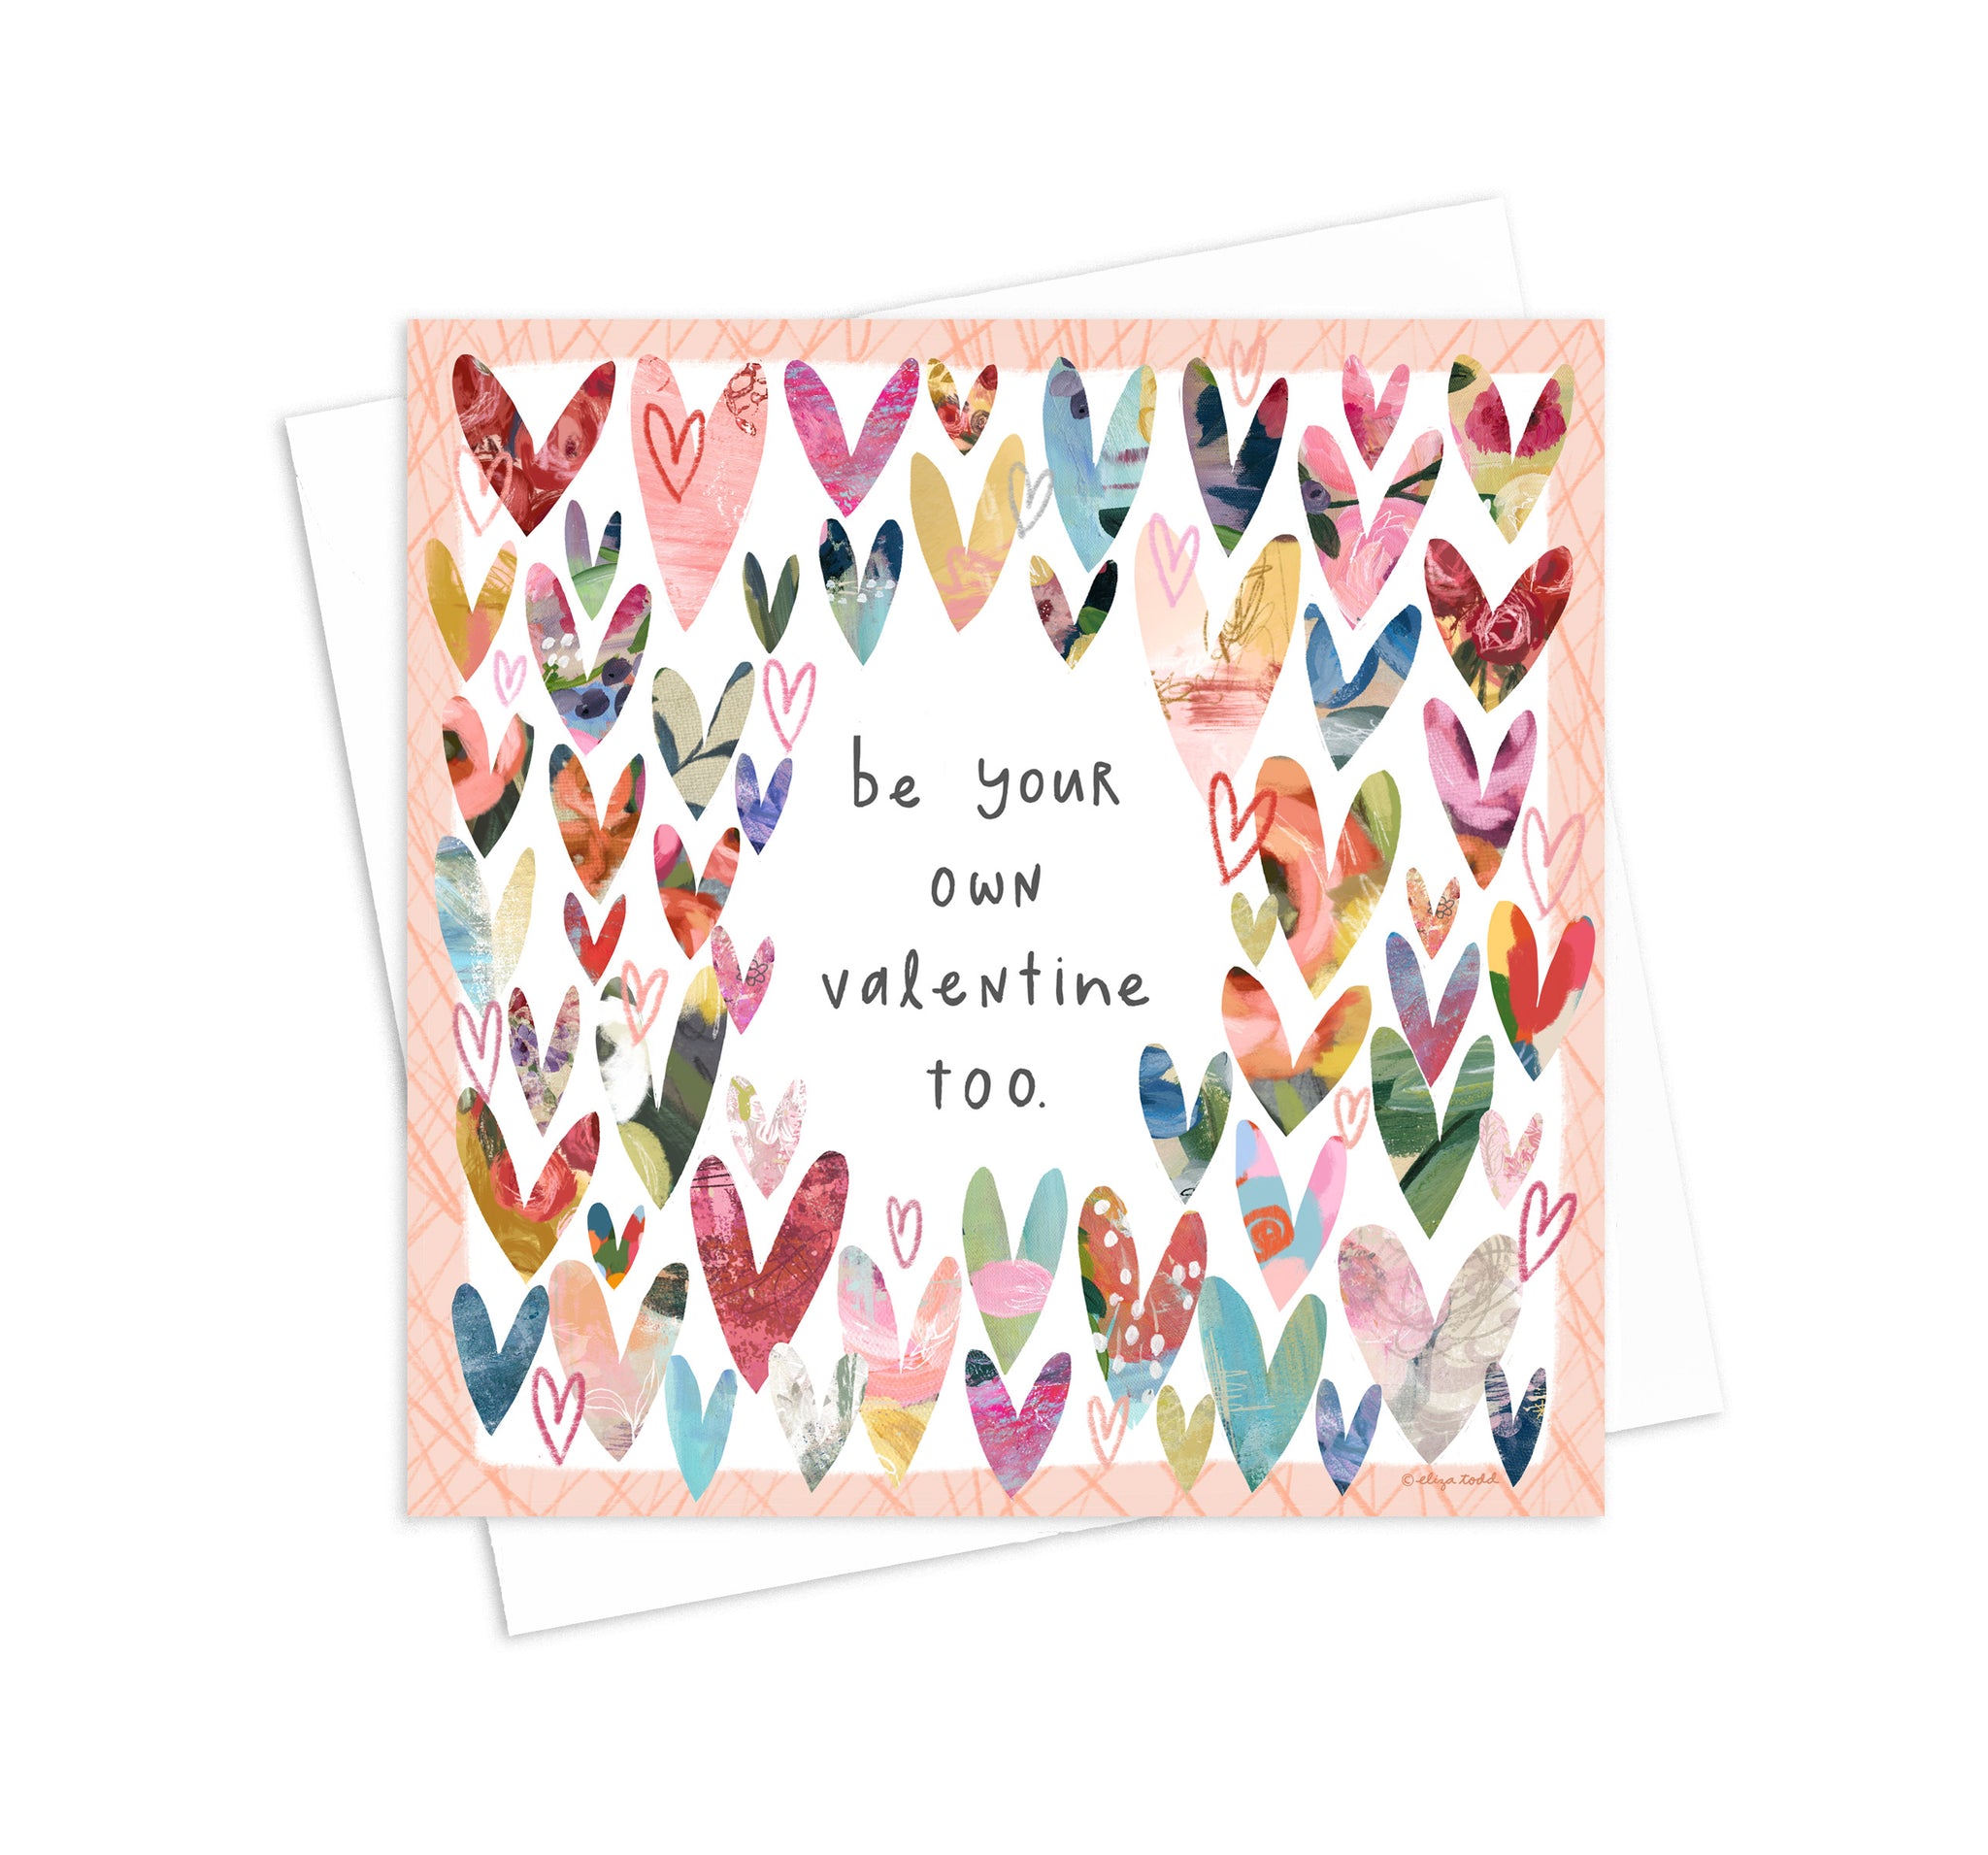 Be Your Own Valentine - 5x5 Inch Square Greeting Card